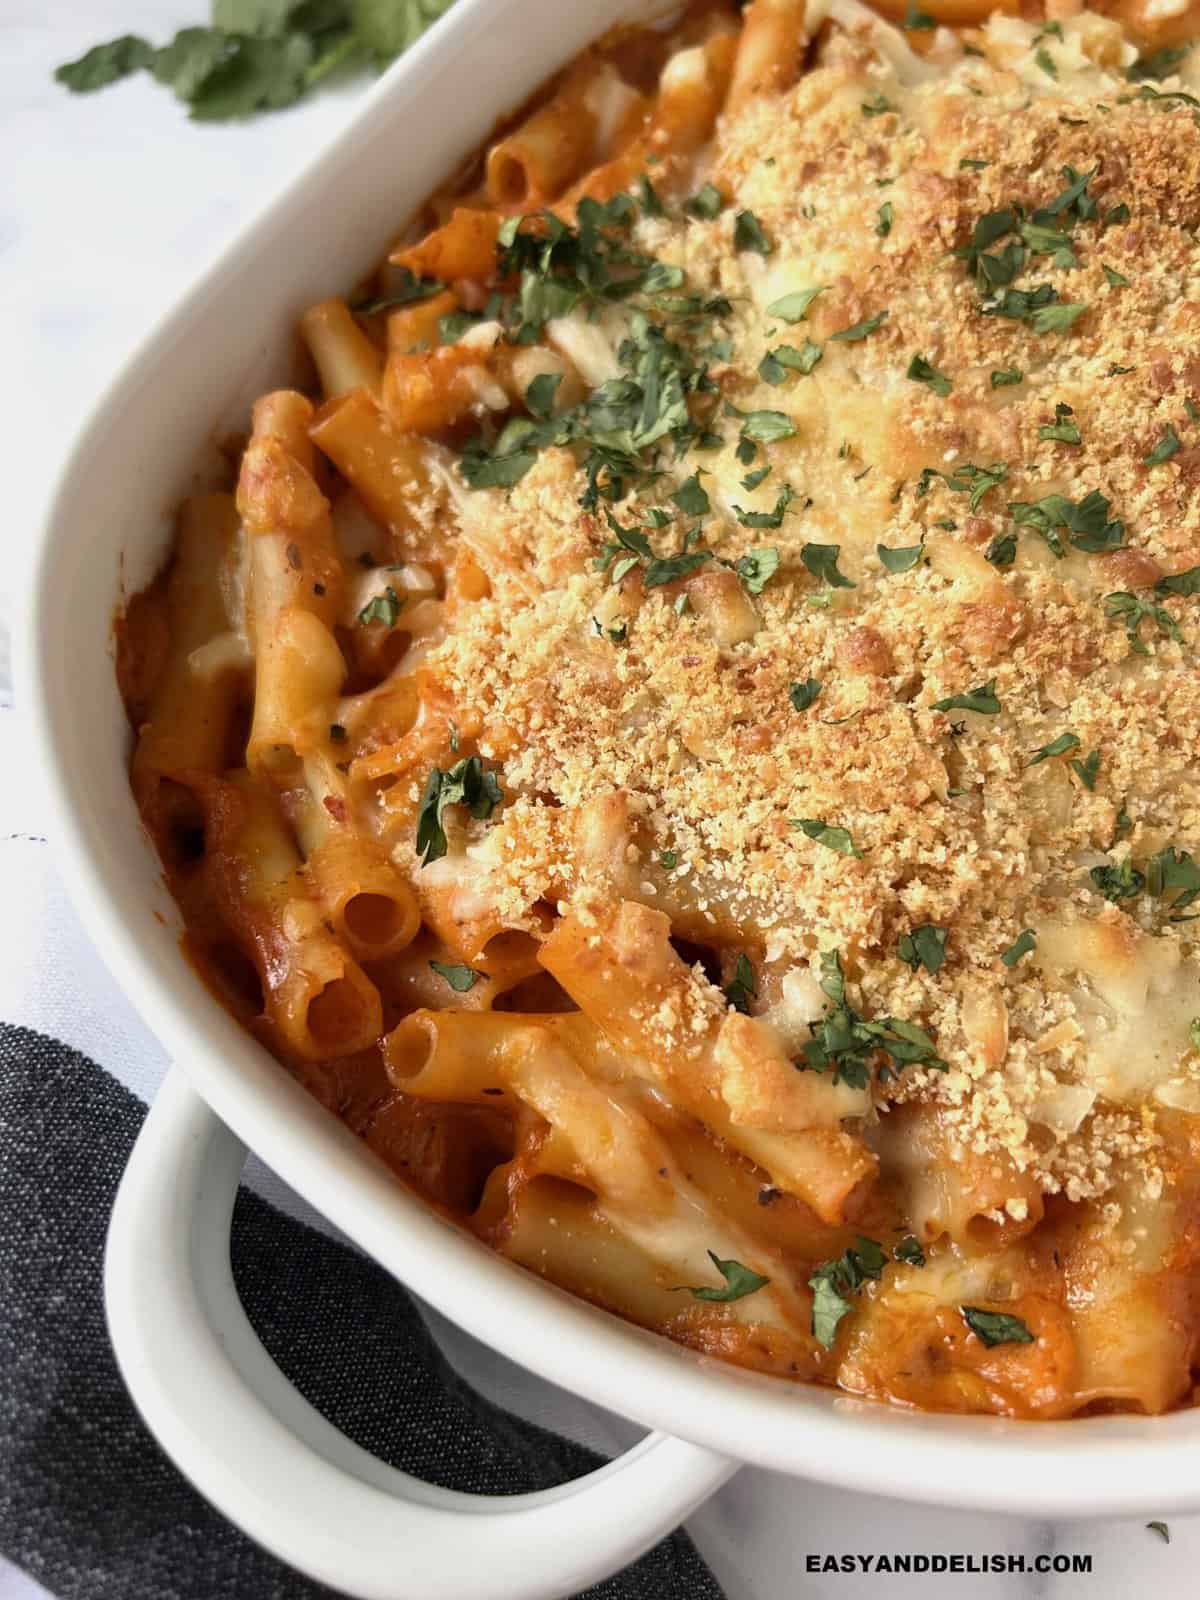 Olive Garden Ziti al Forno topped with crispy bread crumbs and parsley